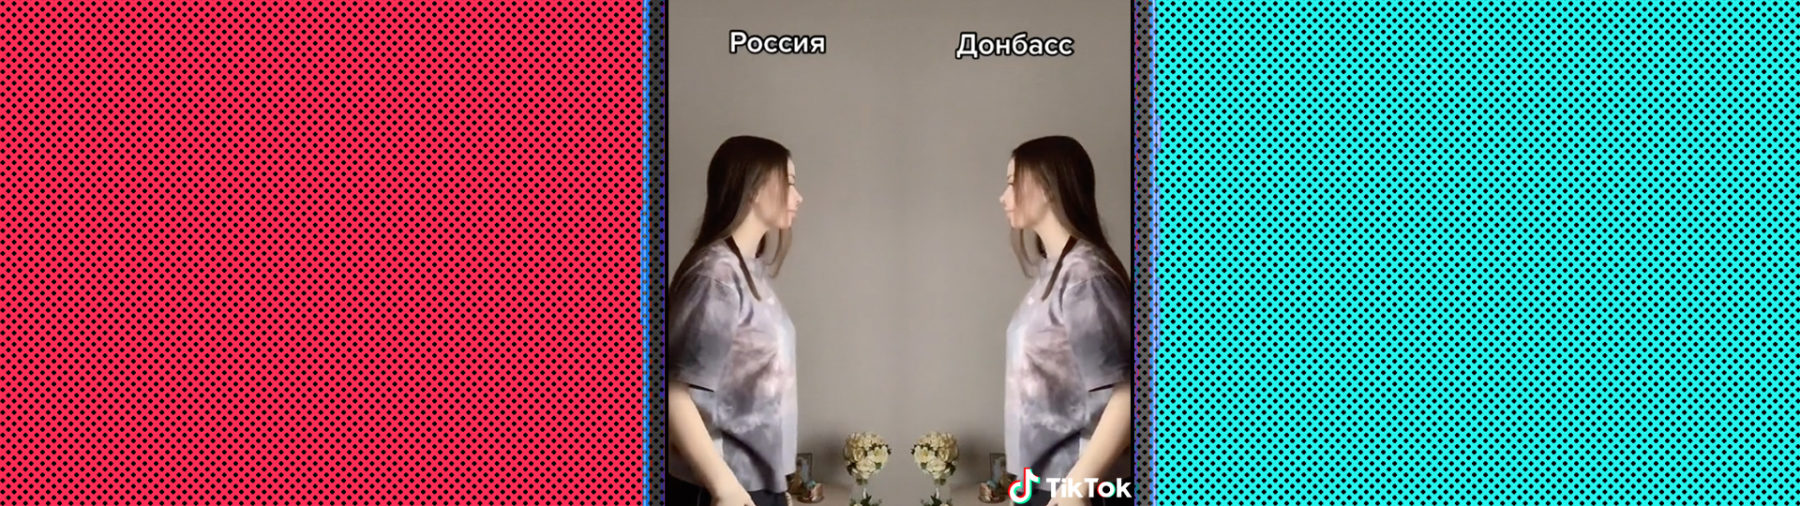 Despite TikTok’s ban on uploads in Russia, influencers are using it to spread pro-war propaganda. Others are debunking it.